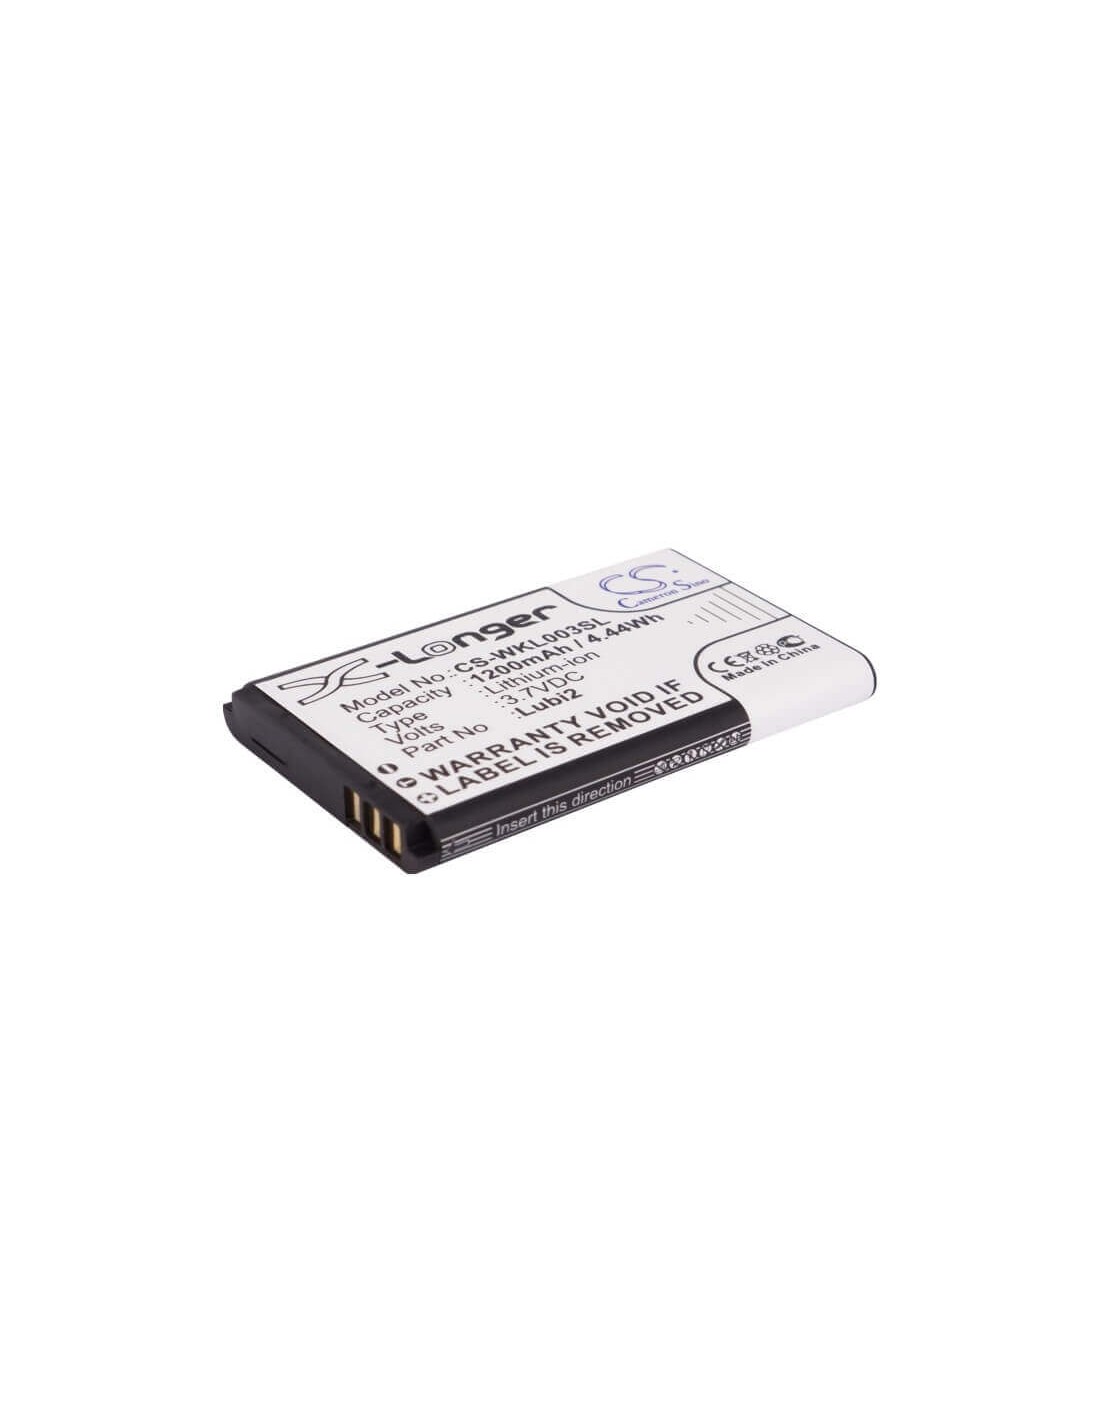 Battery for Aligator A290, A330, A350 3.7V, 1200mAh - 4.44Wh